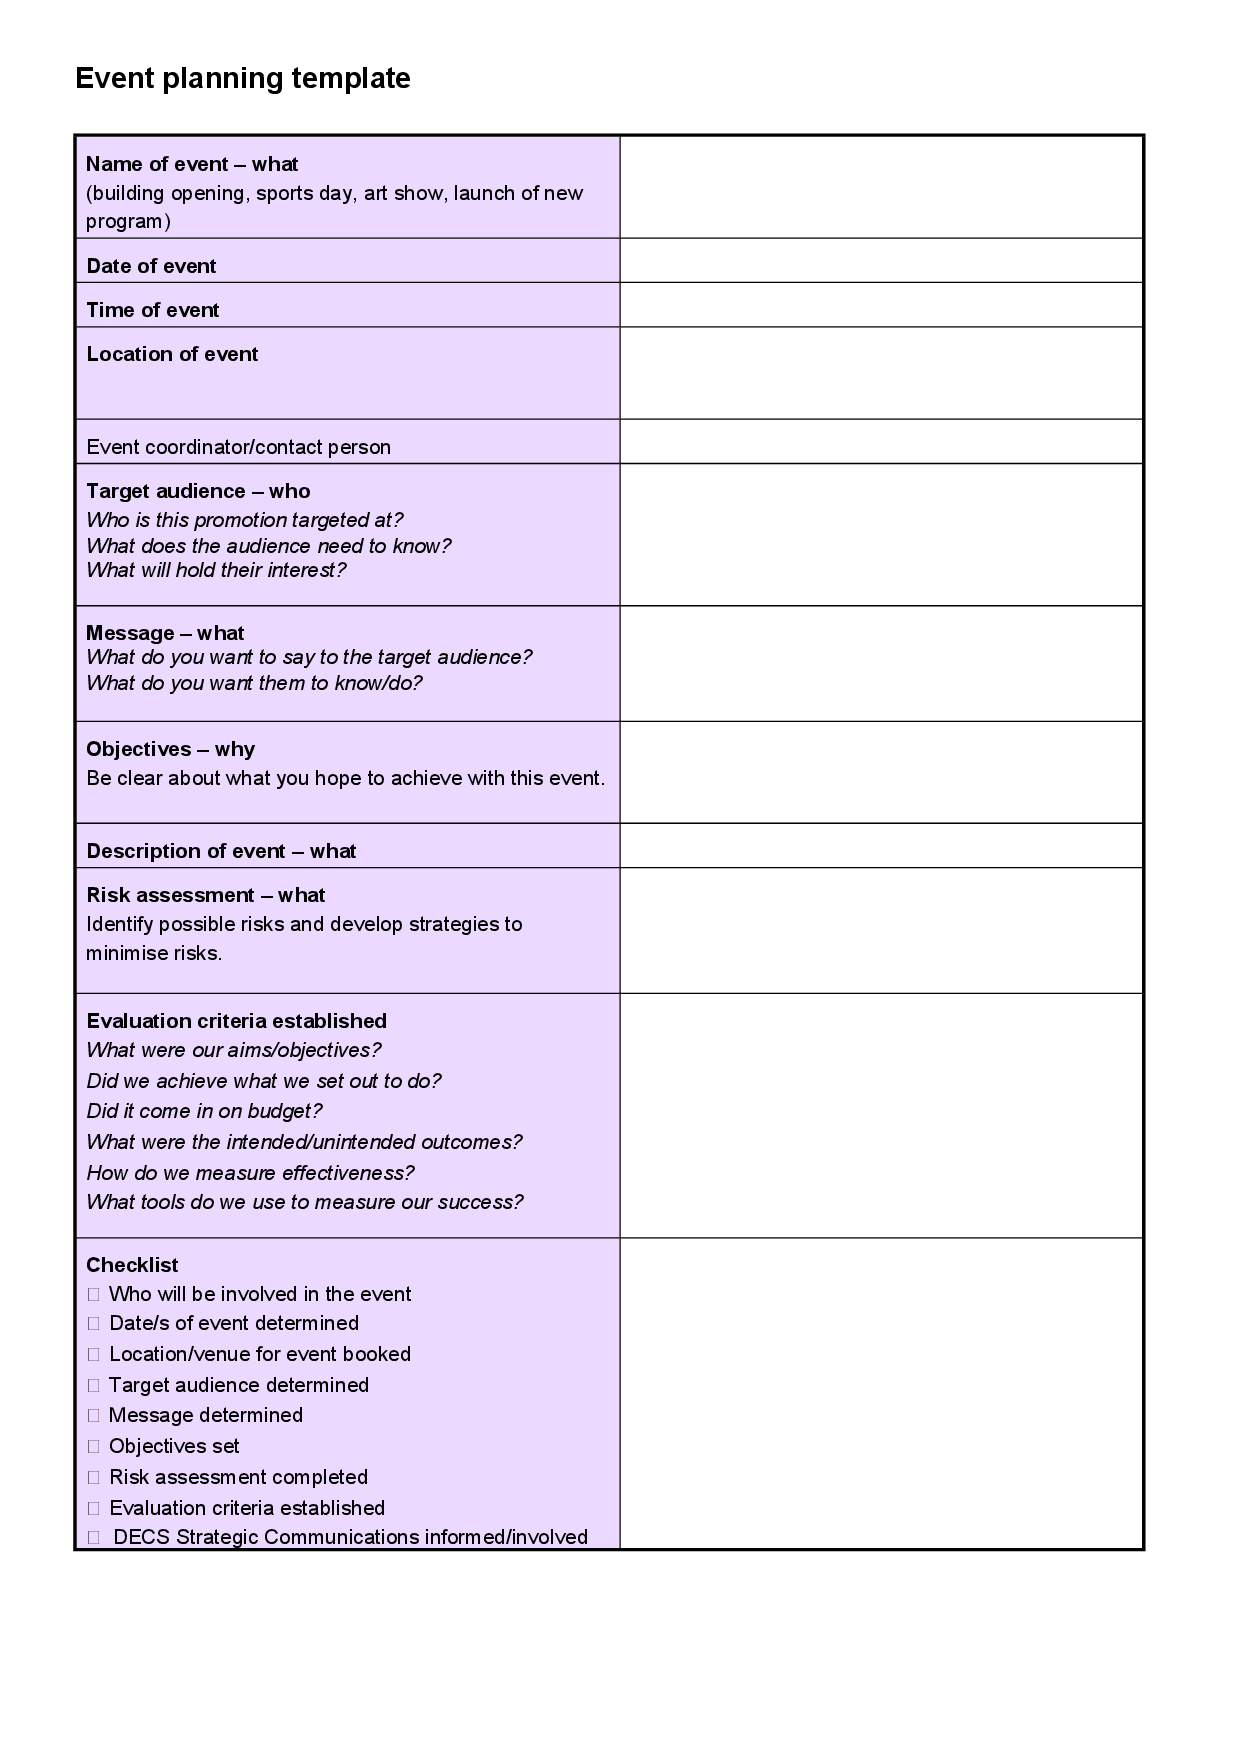 Event Planning Templates  Documents and PDFs Intended For Corporate Event Checklist Template With Corporate Event Checklist Template